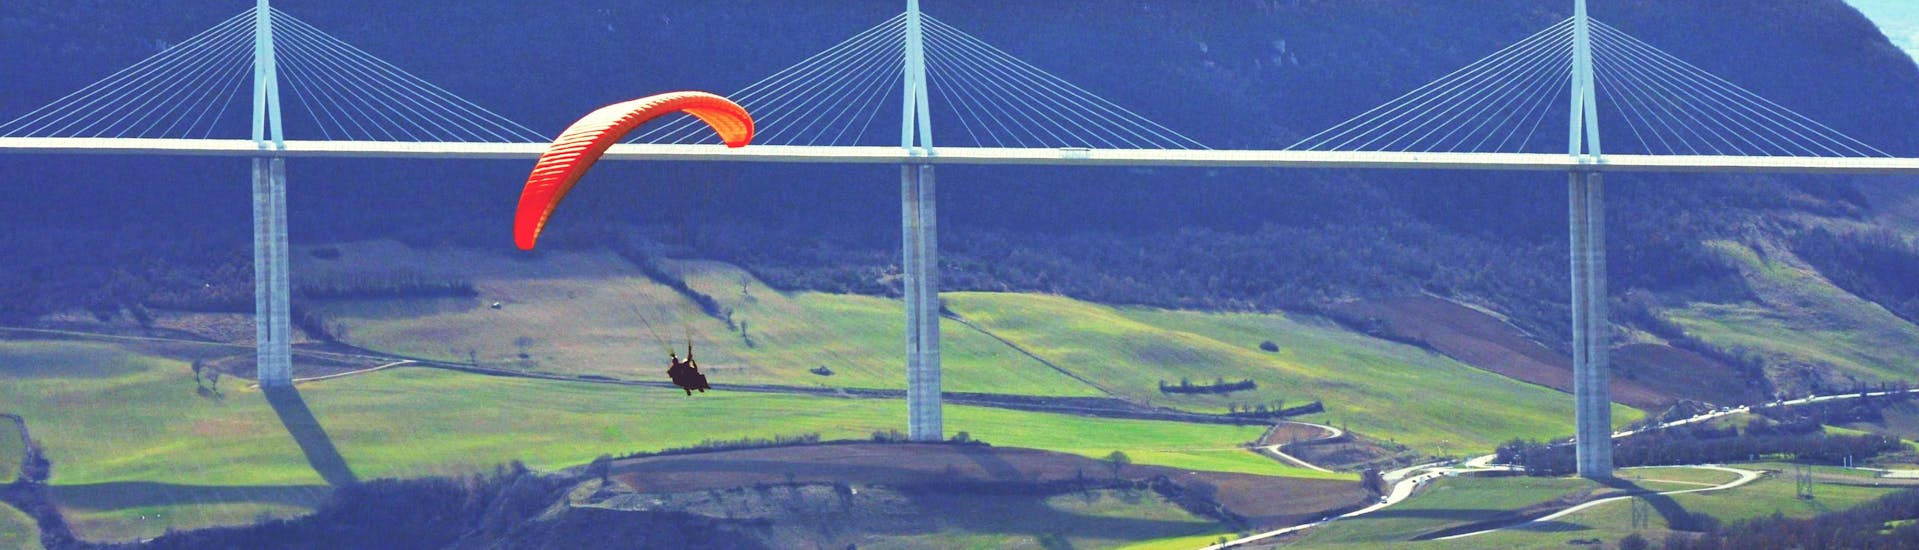 A paragliding pilot from Air Magic Parapente is doing a Tandem Paragliding Flight "Discovery Kids" in front of the Millau Viaduct.